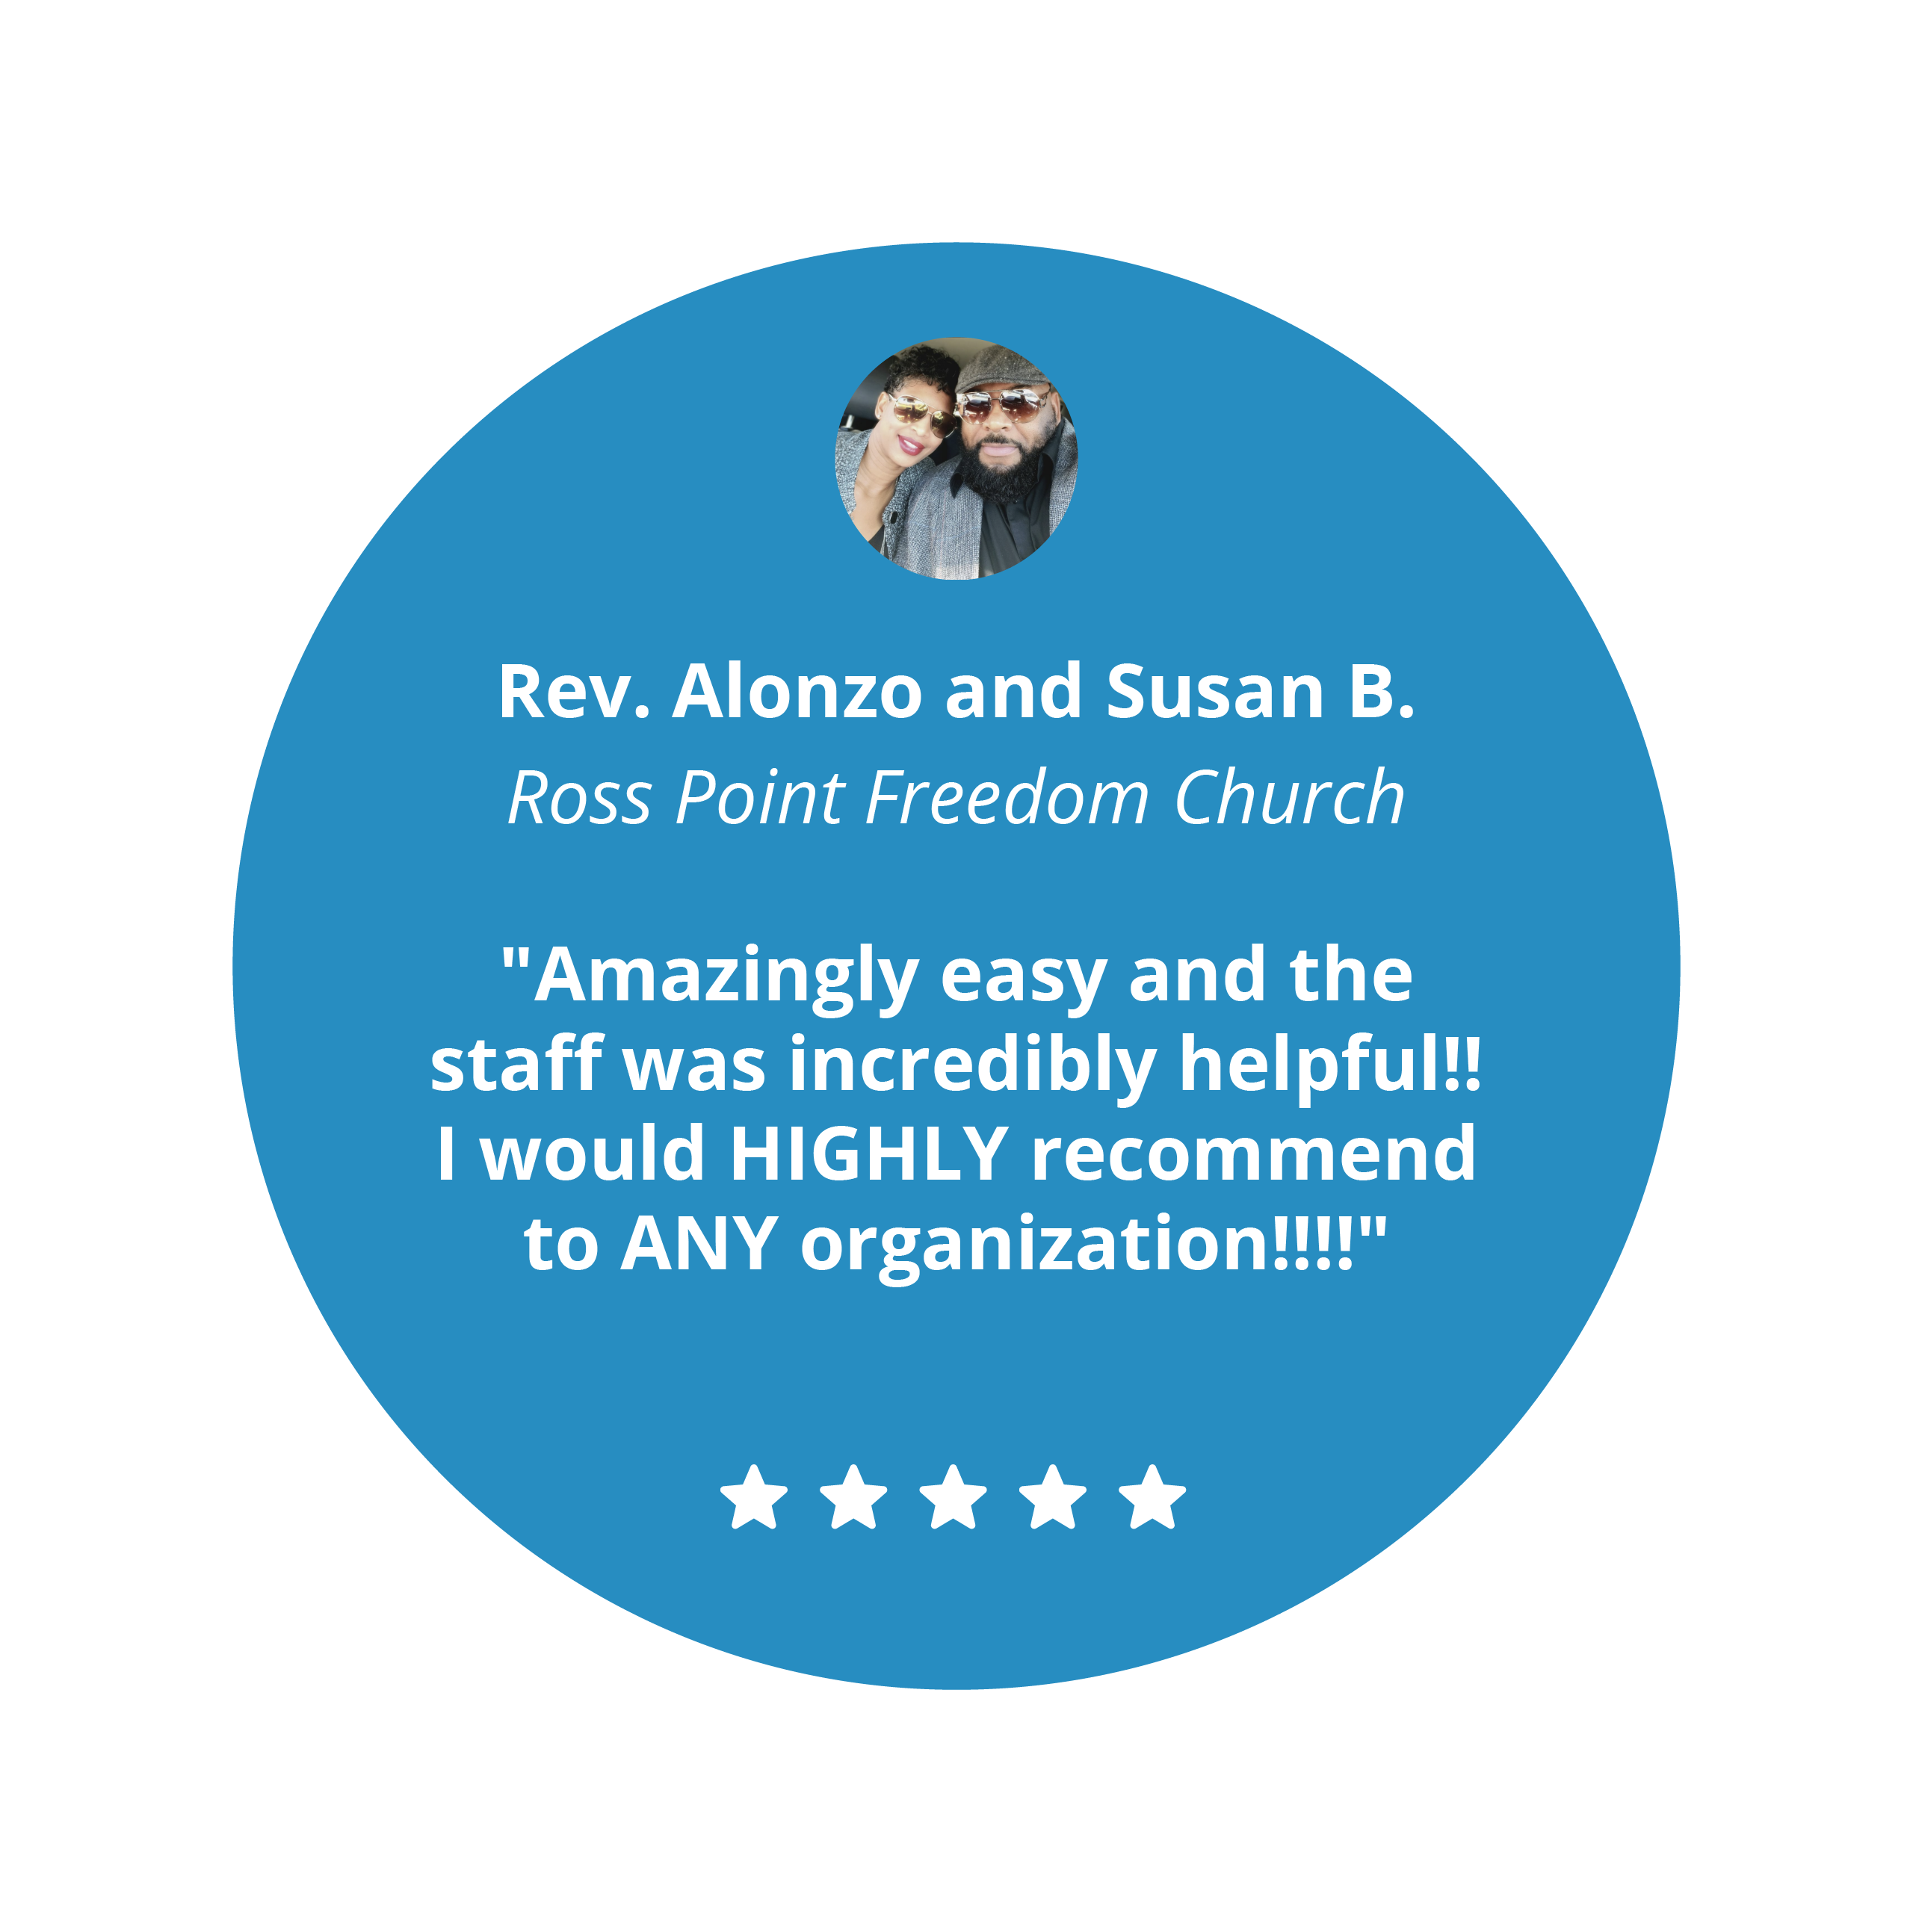 5 star review from Rev. Alonzo and Susan B. from Ross Point Freedom Church, "Amazingly easy and the staff was incredibly helpful!! I would HIGHLY recommend to ANY organization!!!!"